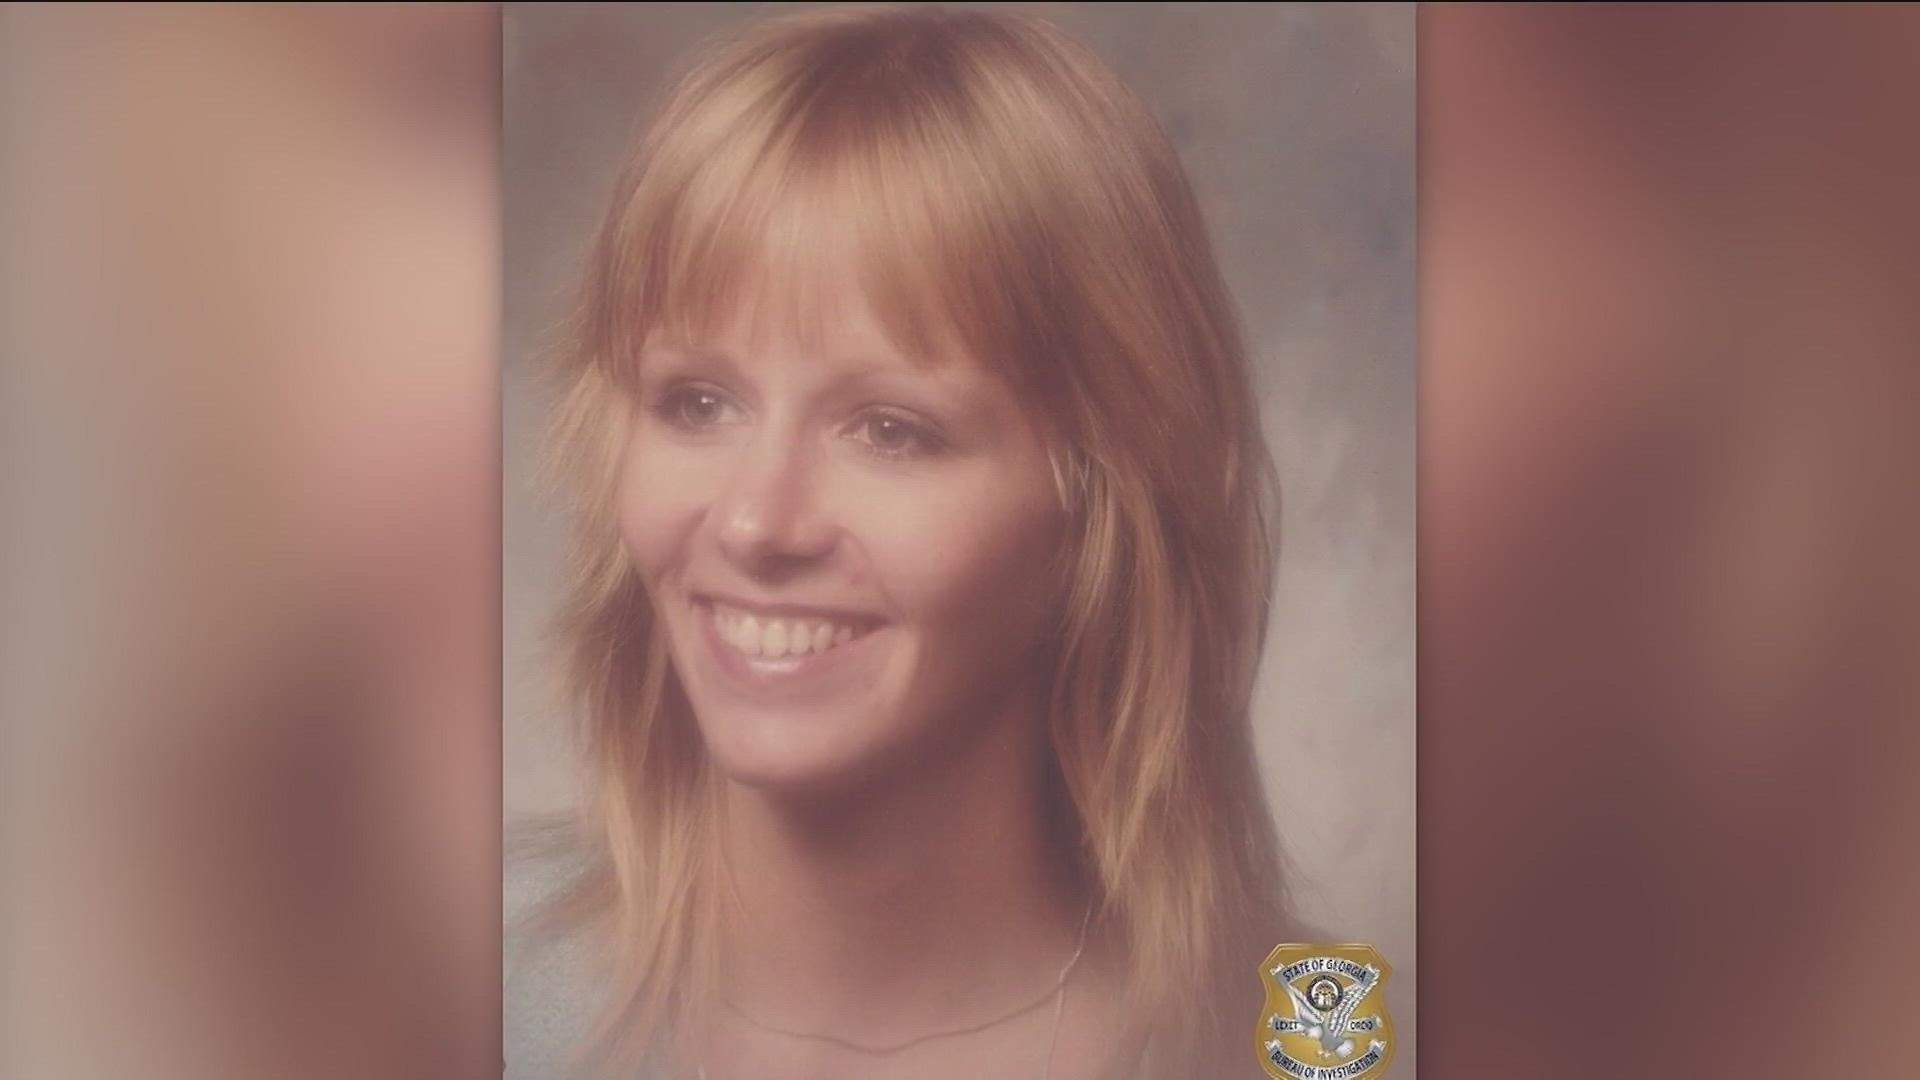 She was found back in 1985 in Newton, hurt and unconscious. She died weeks later.